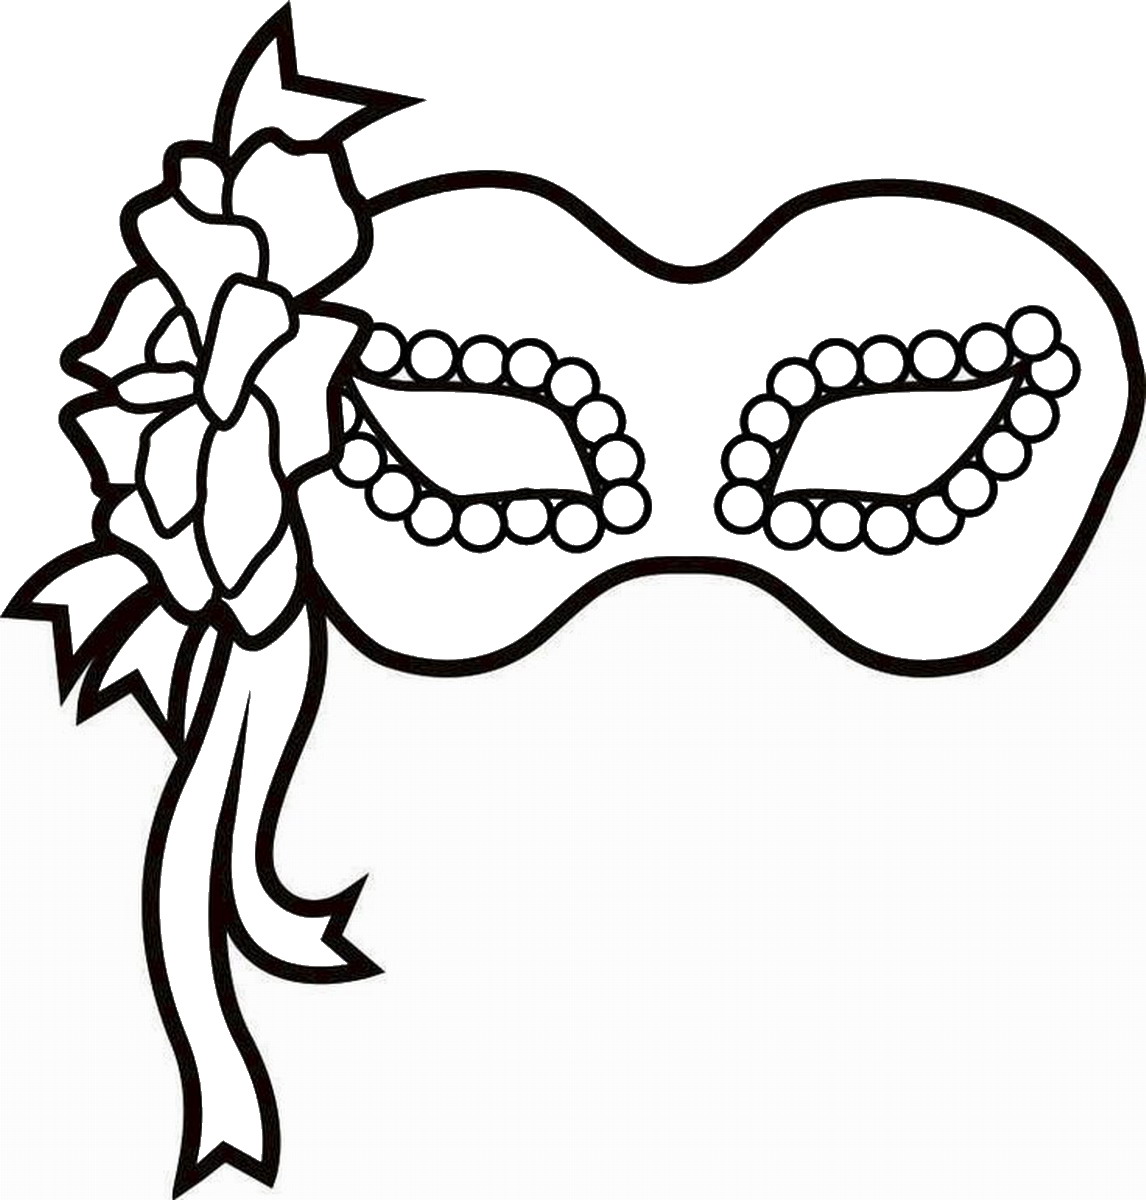 Mardi Gras Coloring Pages